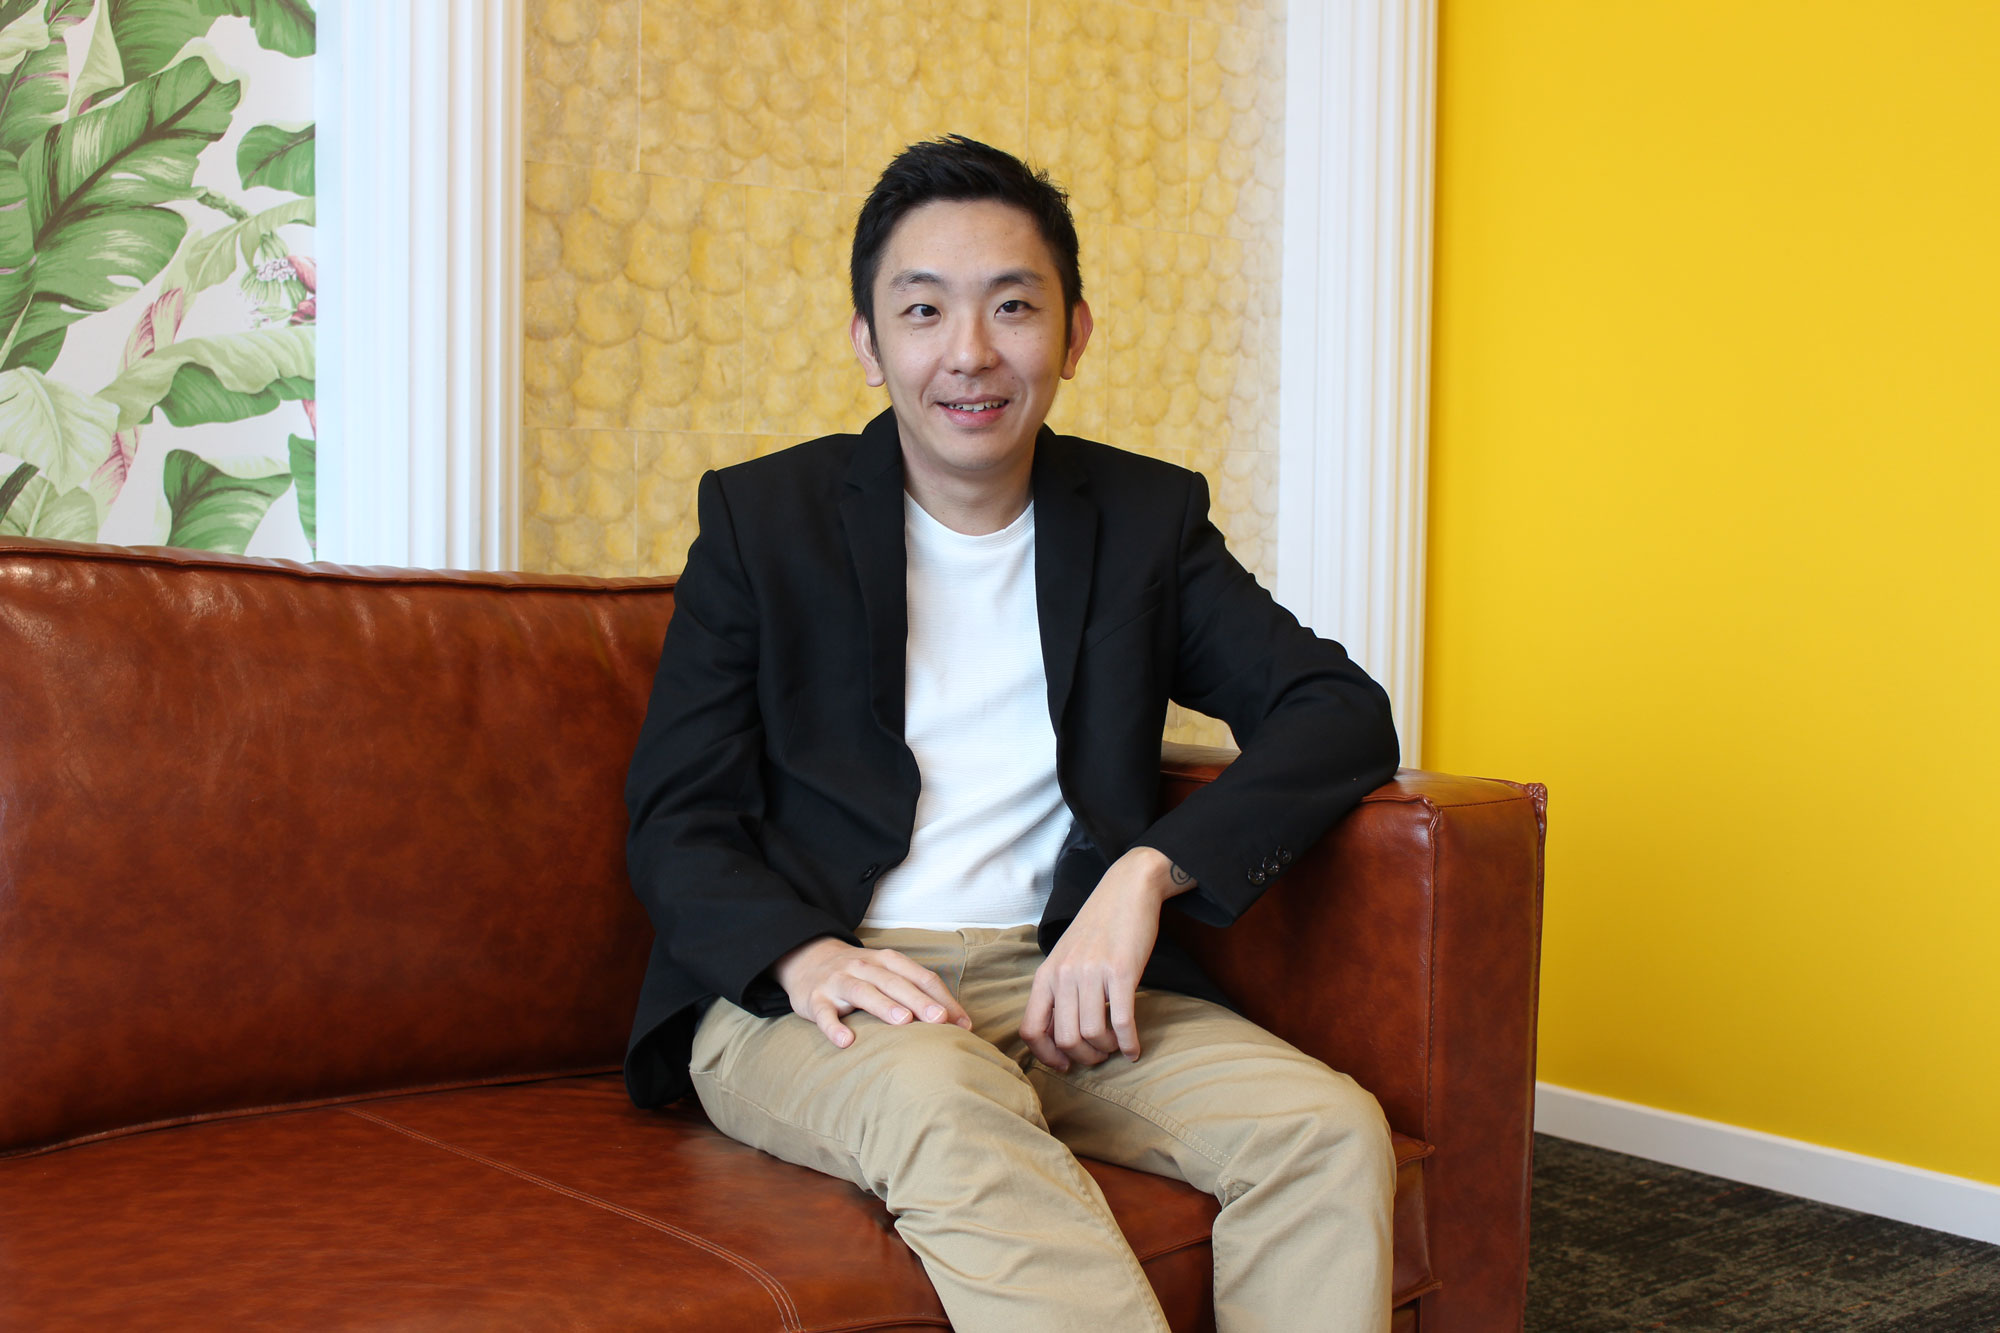 Cruising through Southeast Asia and taking auto sales online: Q&amp;A with Carsome CEO Eric Cheng | KrASIA